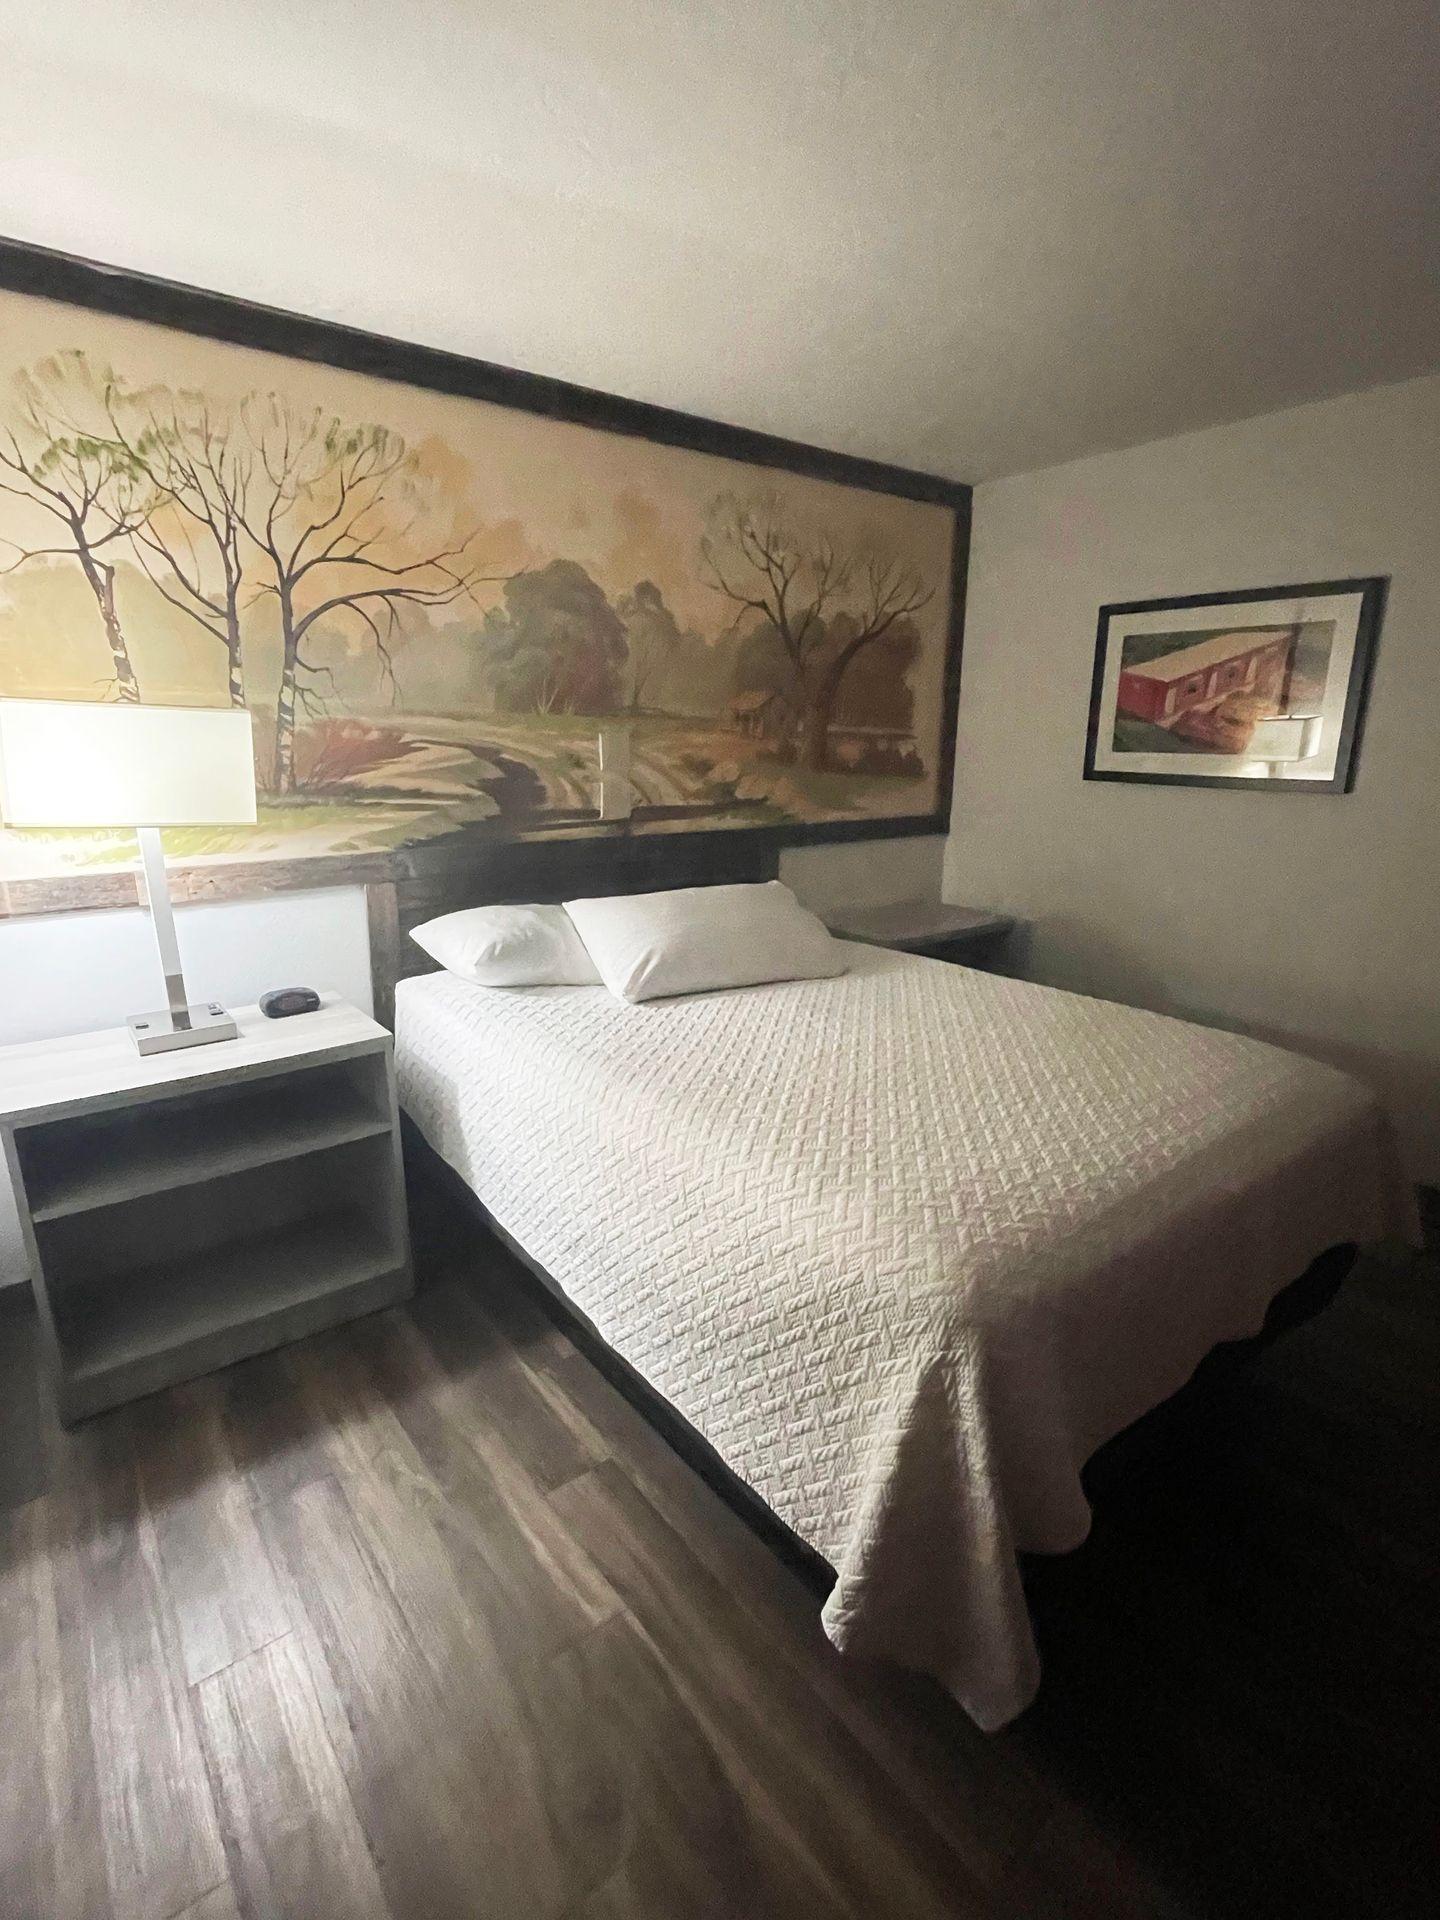 The inside of a standard room at Expedition Lodge. There is a bed with a large piece of artwork behind it.